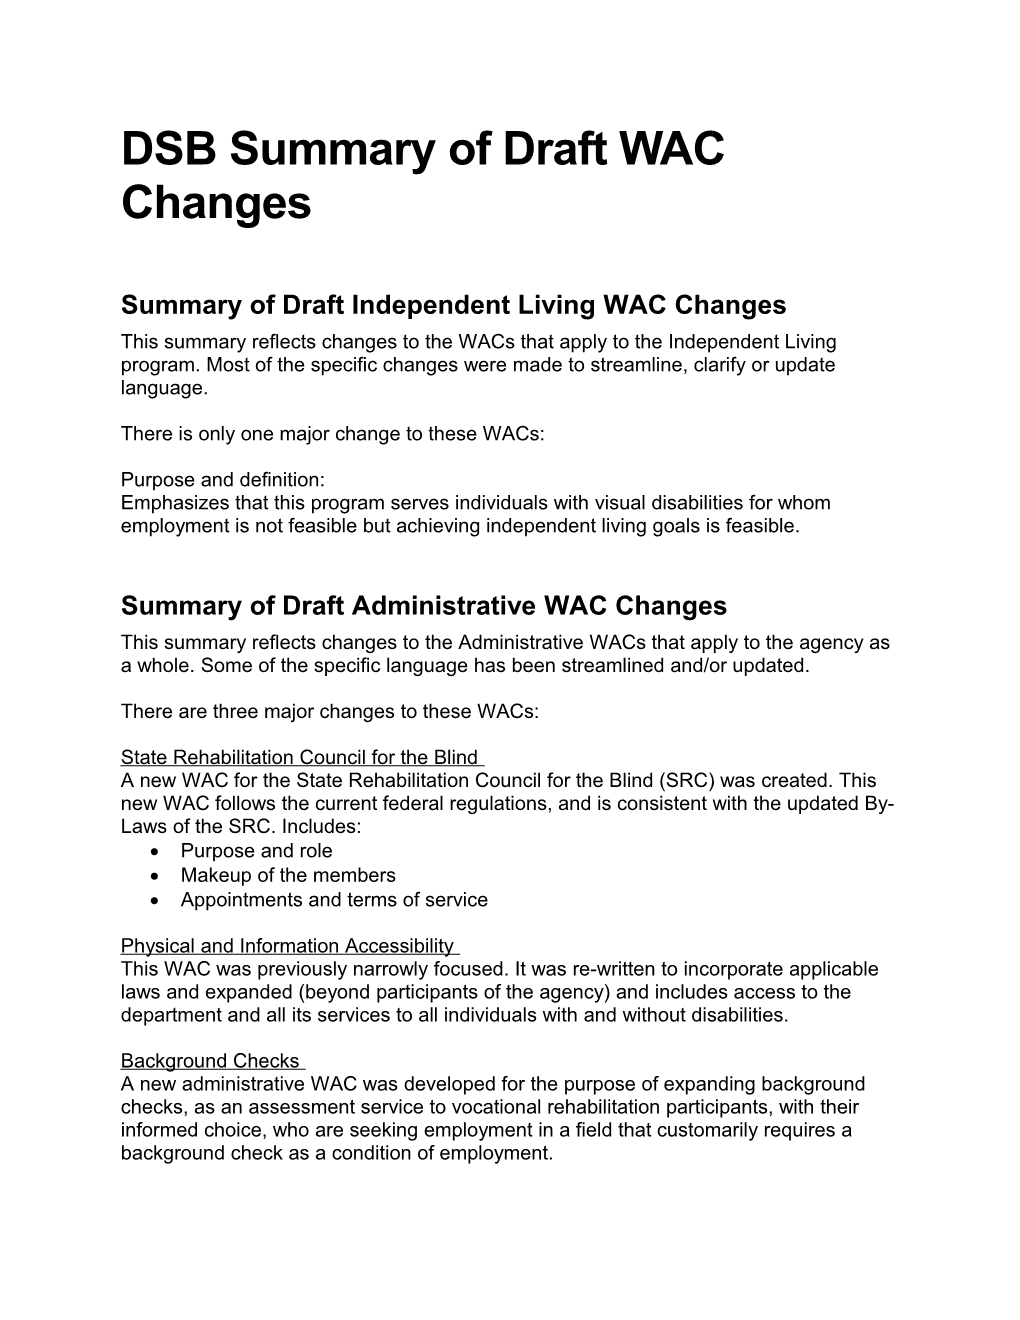 Summary of Draft Independent Living WAC Changes